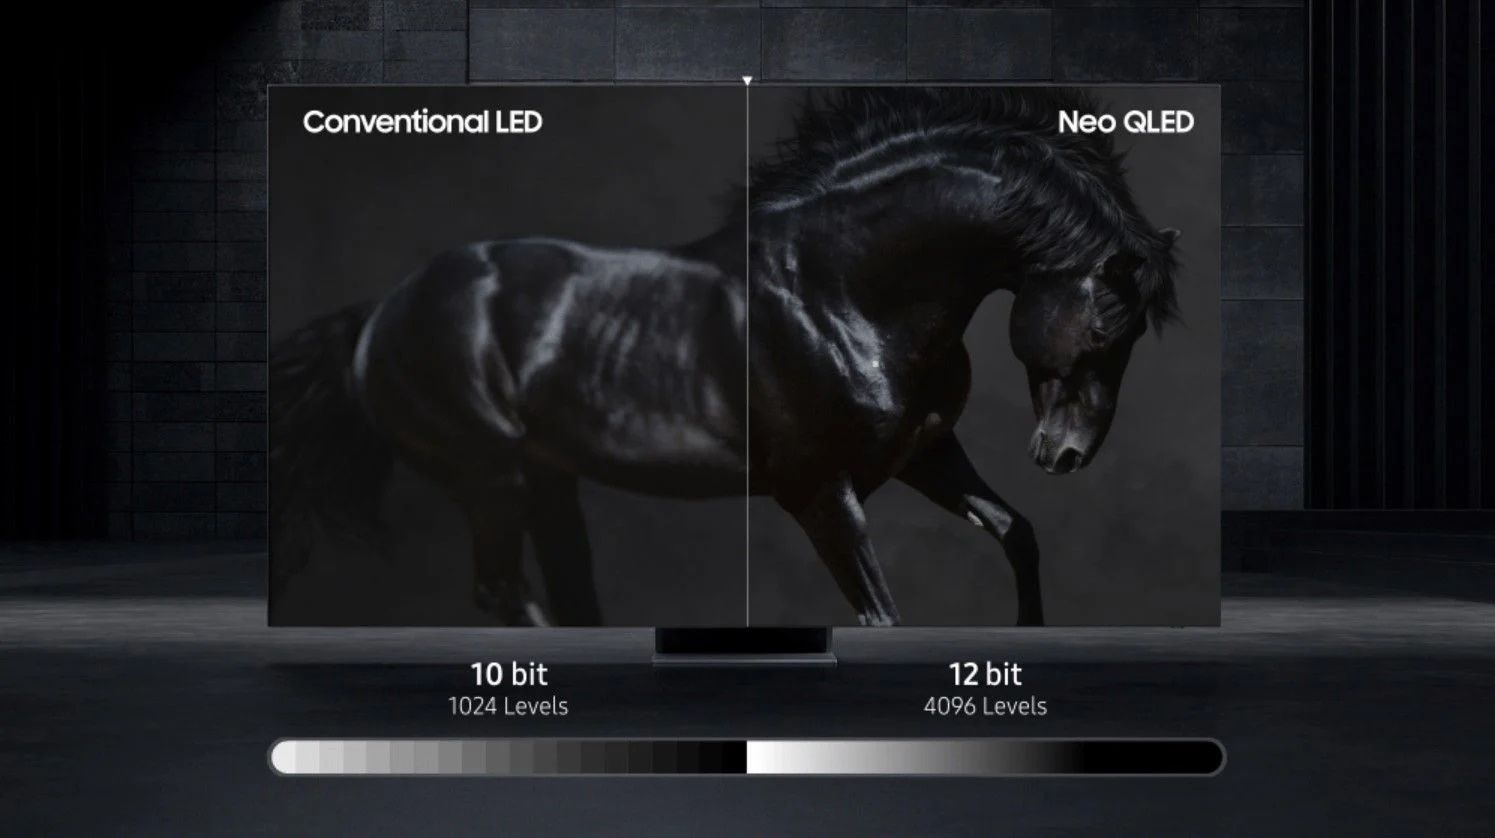 Neo QLED vs. Conventional LED